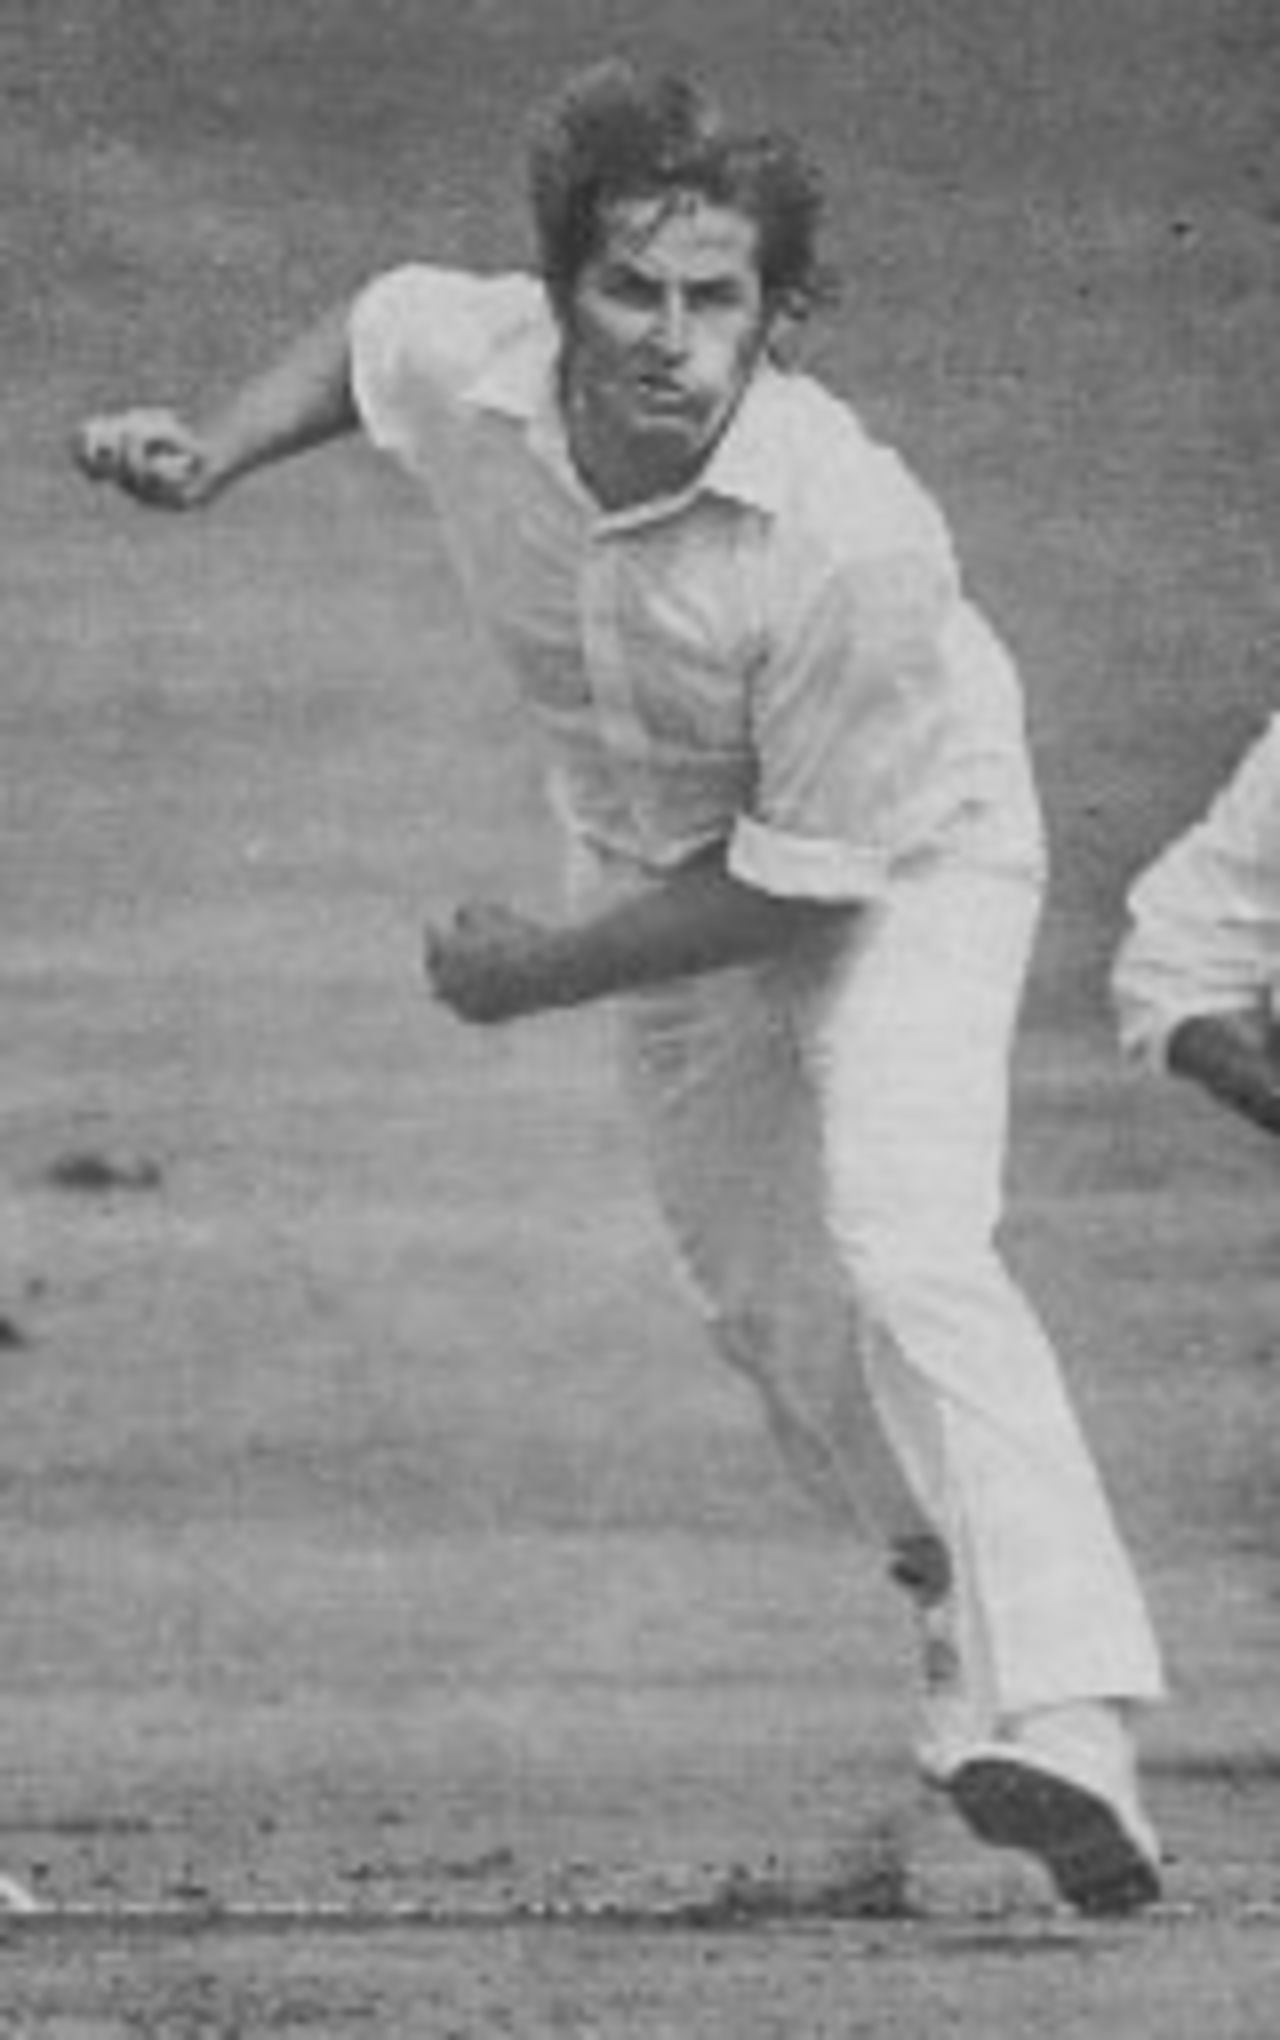 Gary Gilmour bowling during the 1975 World Cup